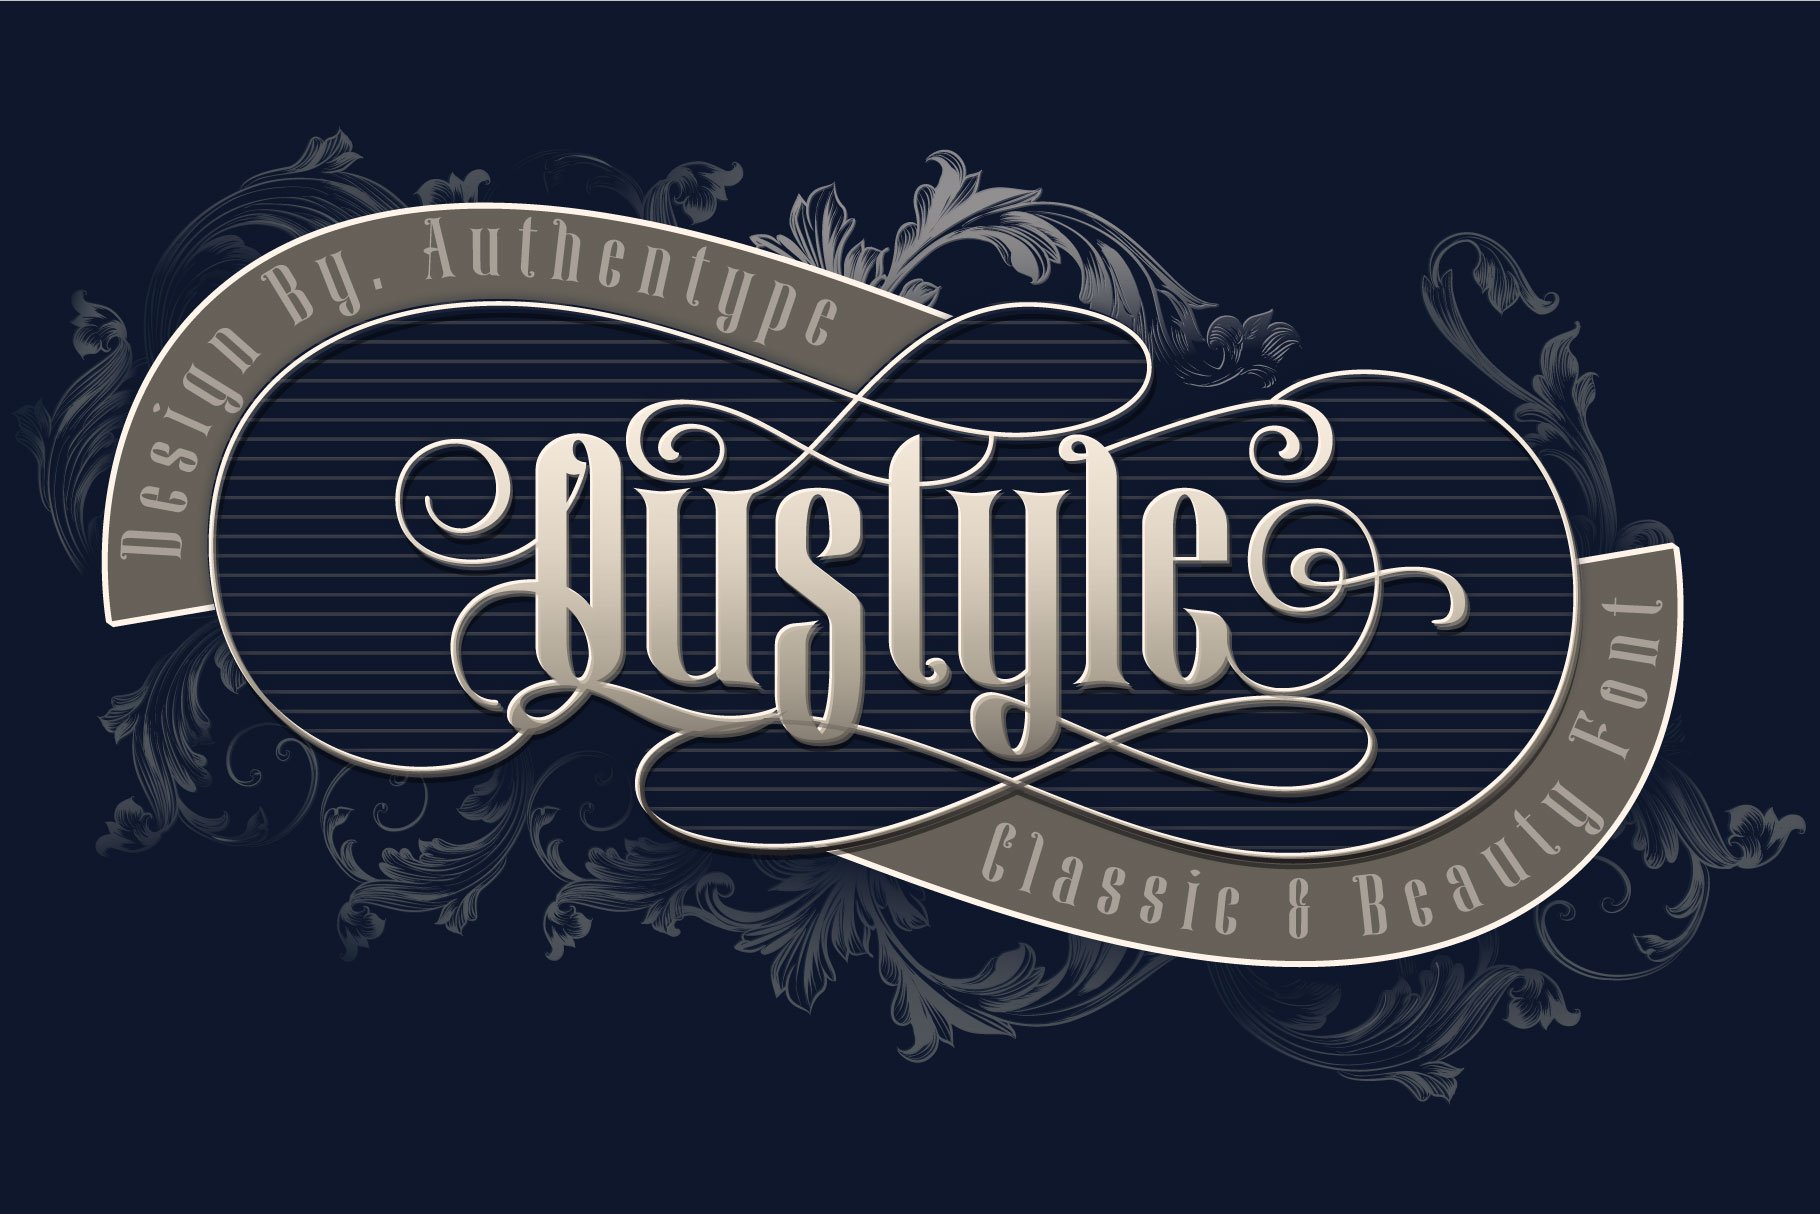 Qustyle Classic Font cover image.